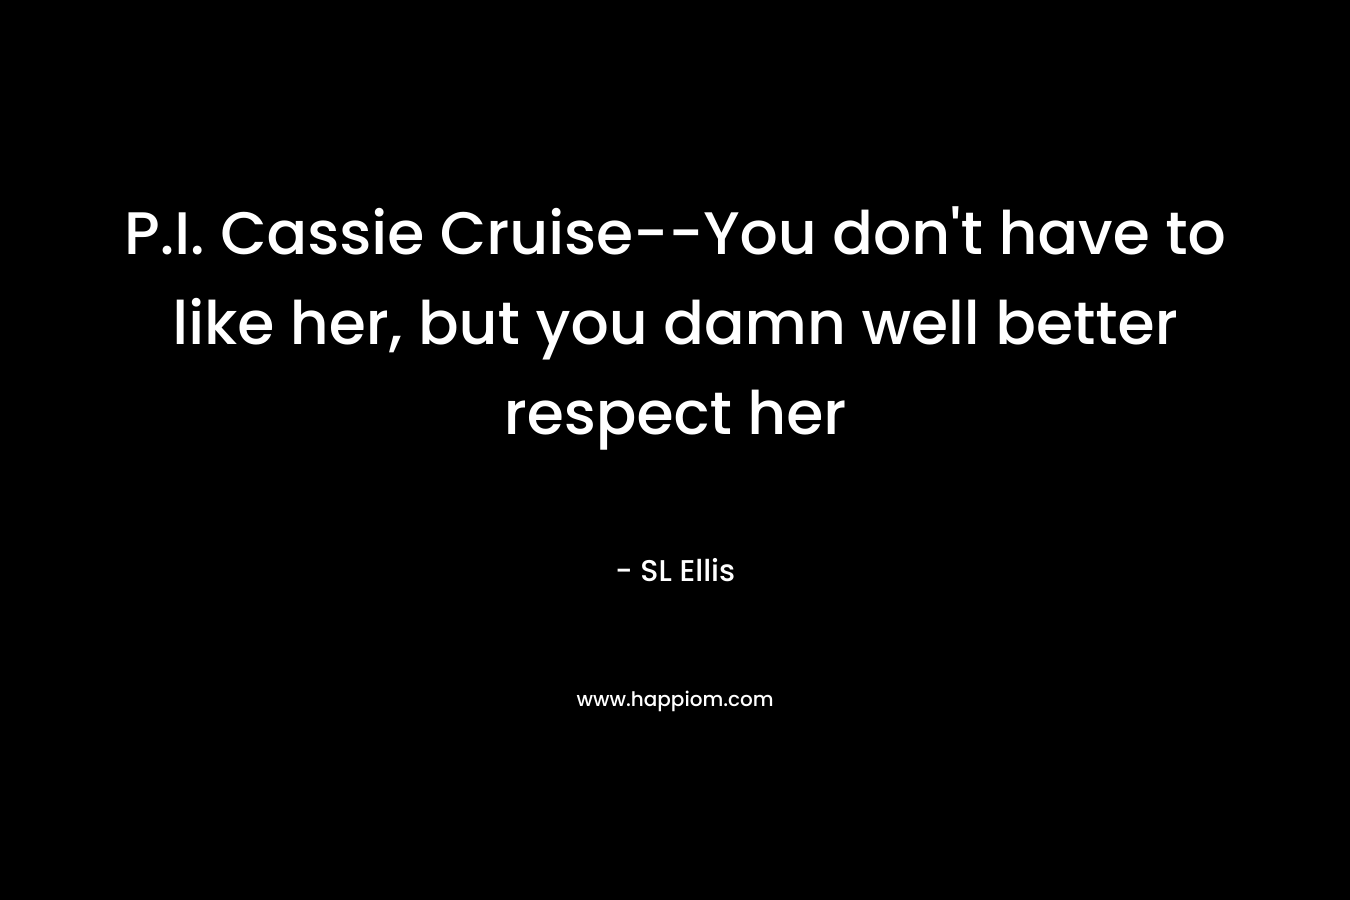 P.I. Cassie Cruise--You don't have to like her, but you damn well better respect her